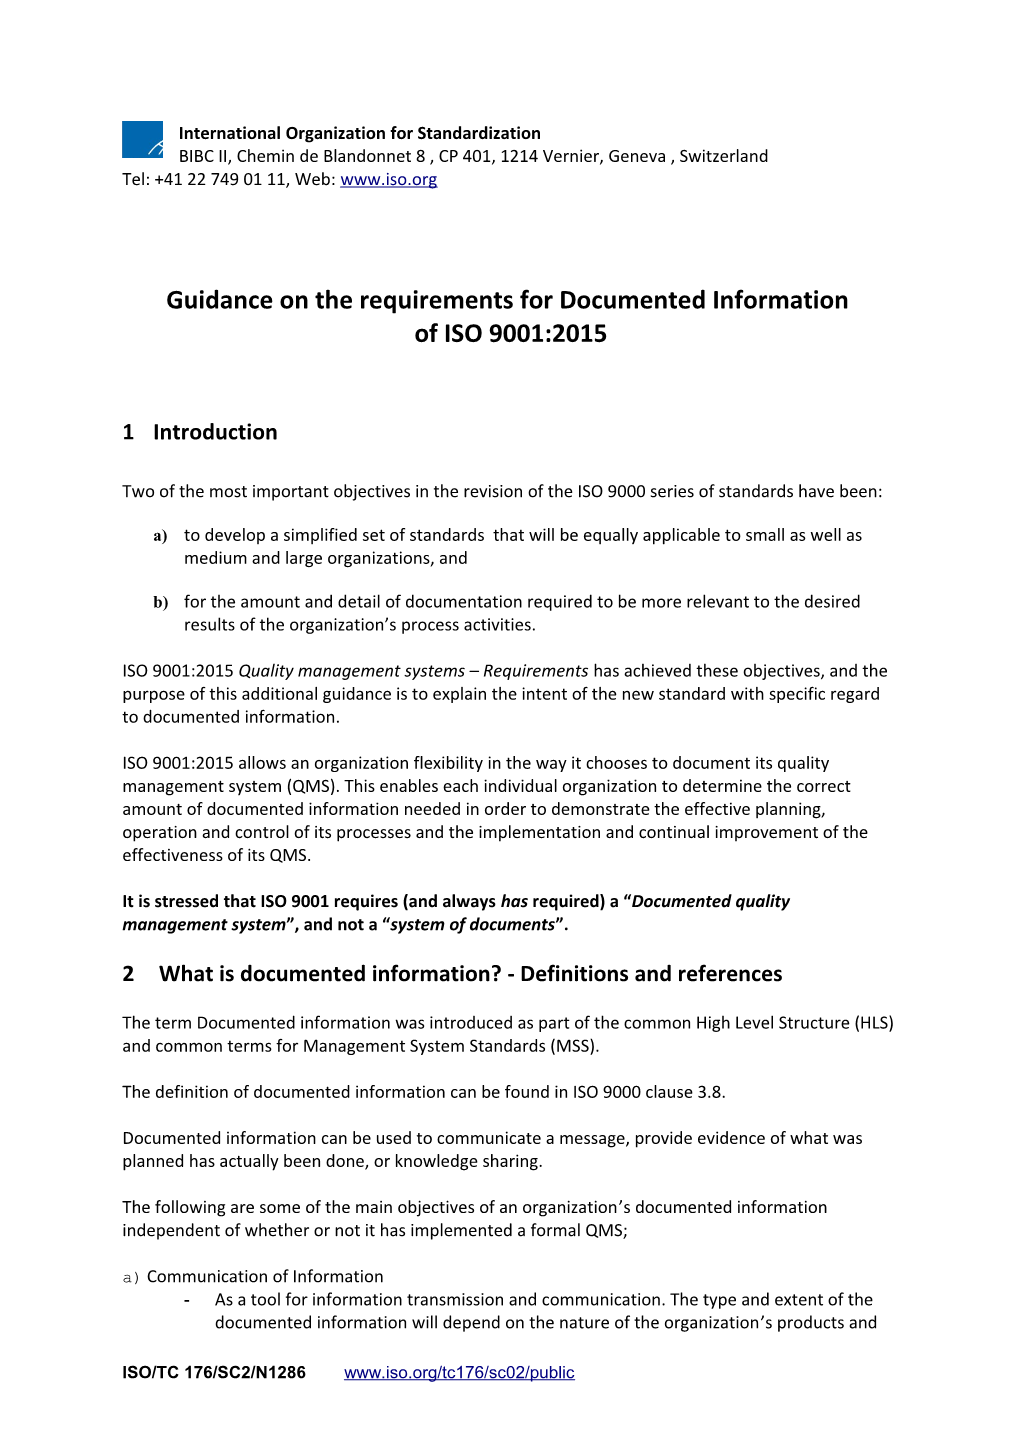 Guidance on the Requirements for Documented Information of ISO 9001:2015